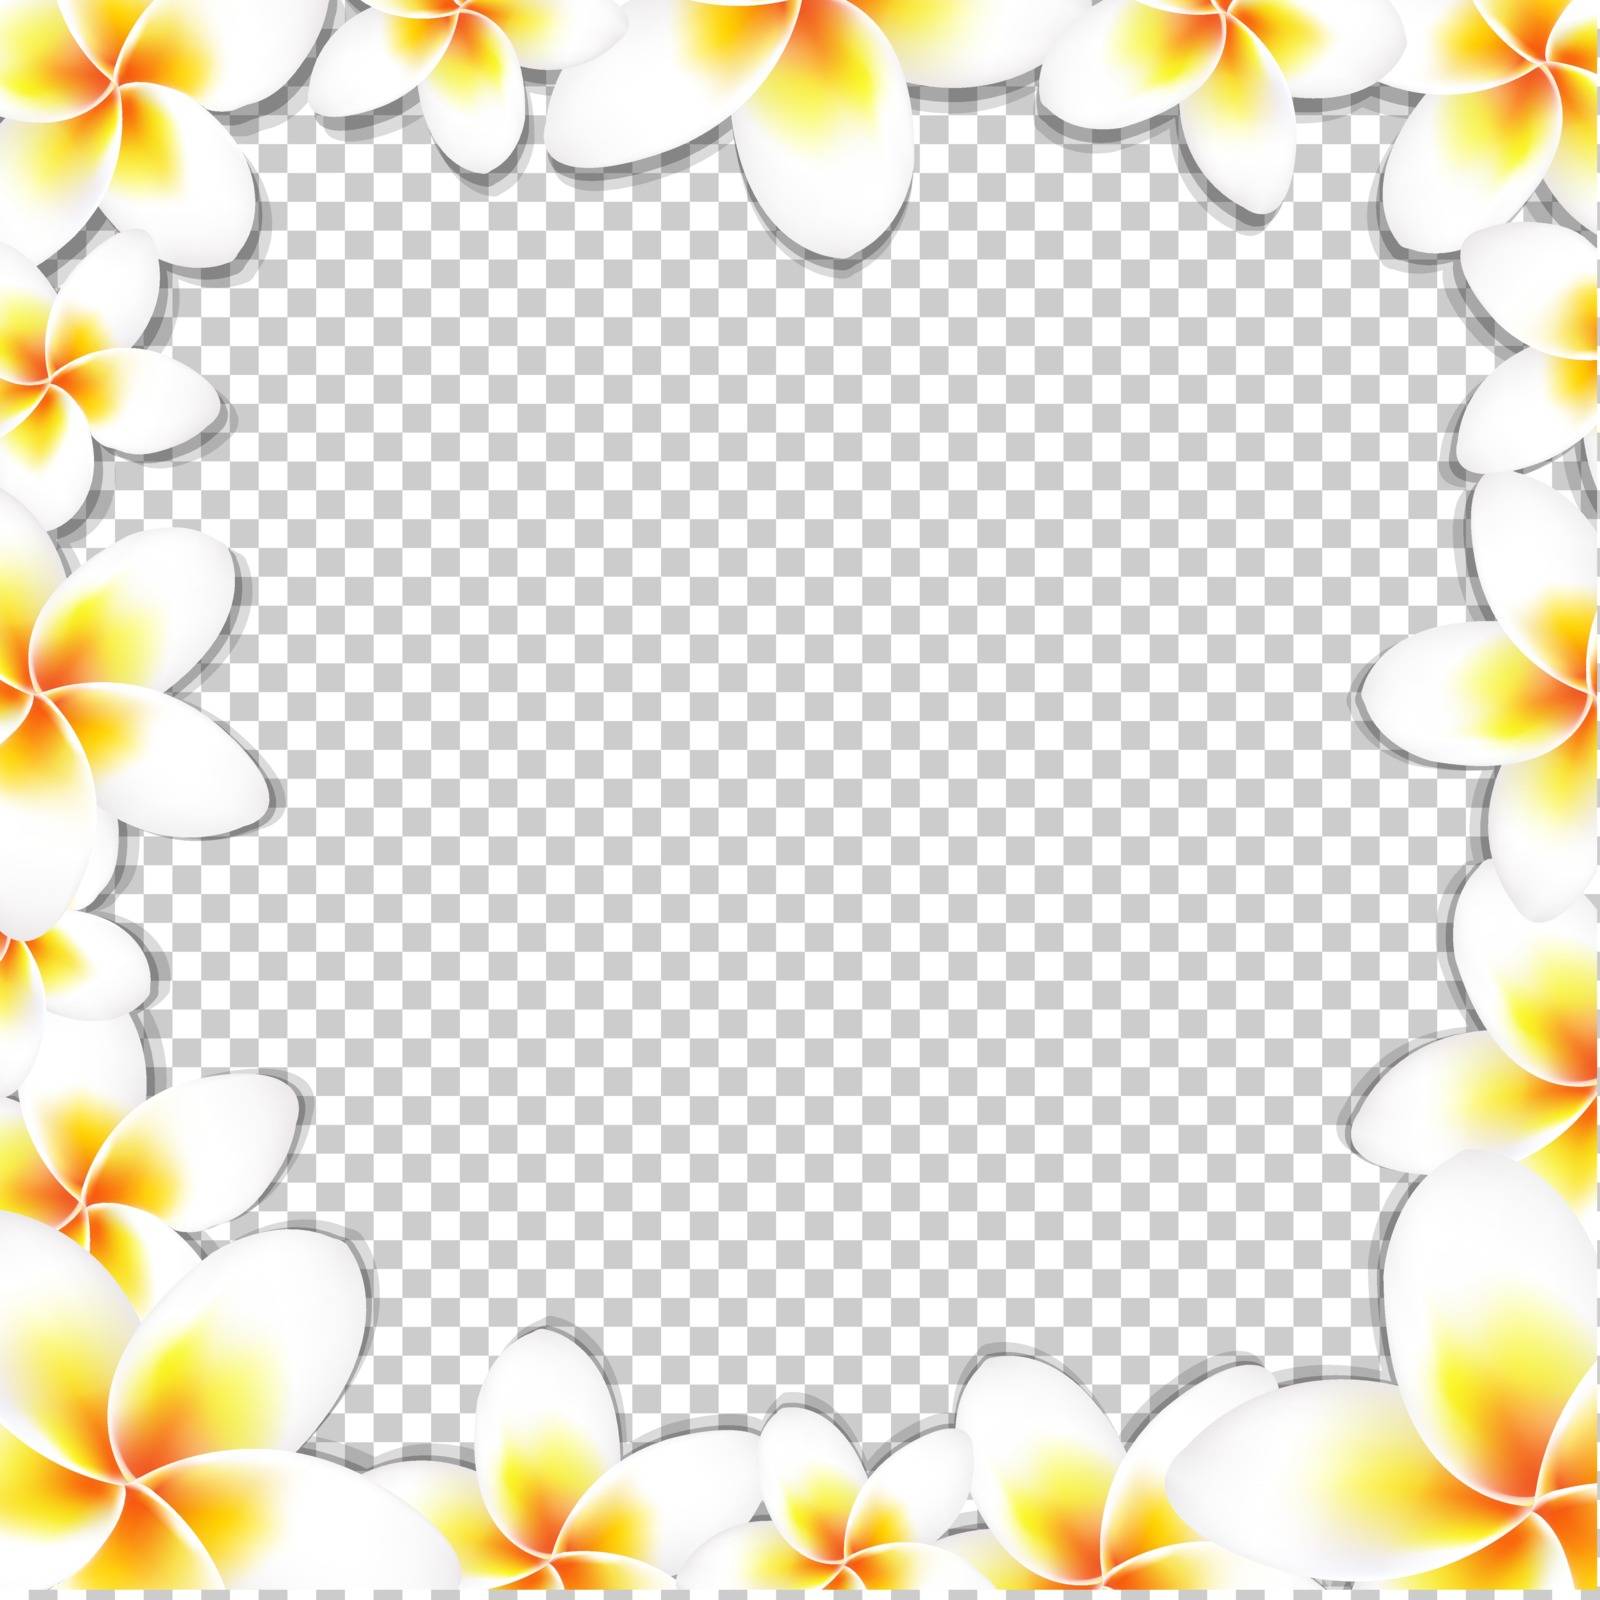 Frangipani FrameWith Gradient Mesh, Isolated on Transparent Background, Vector Illustration